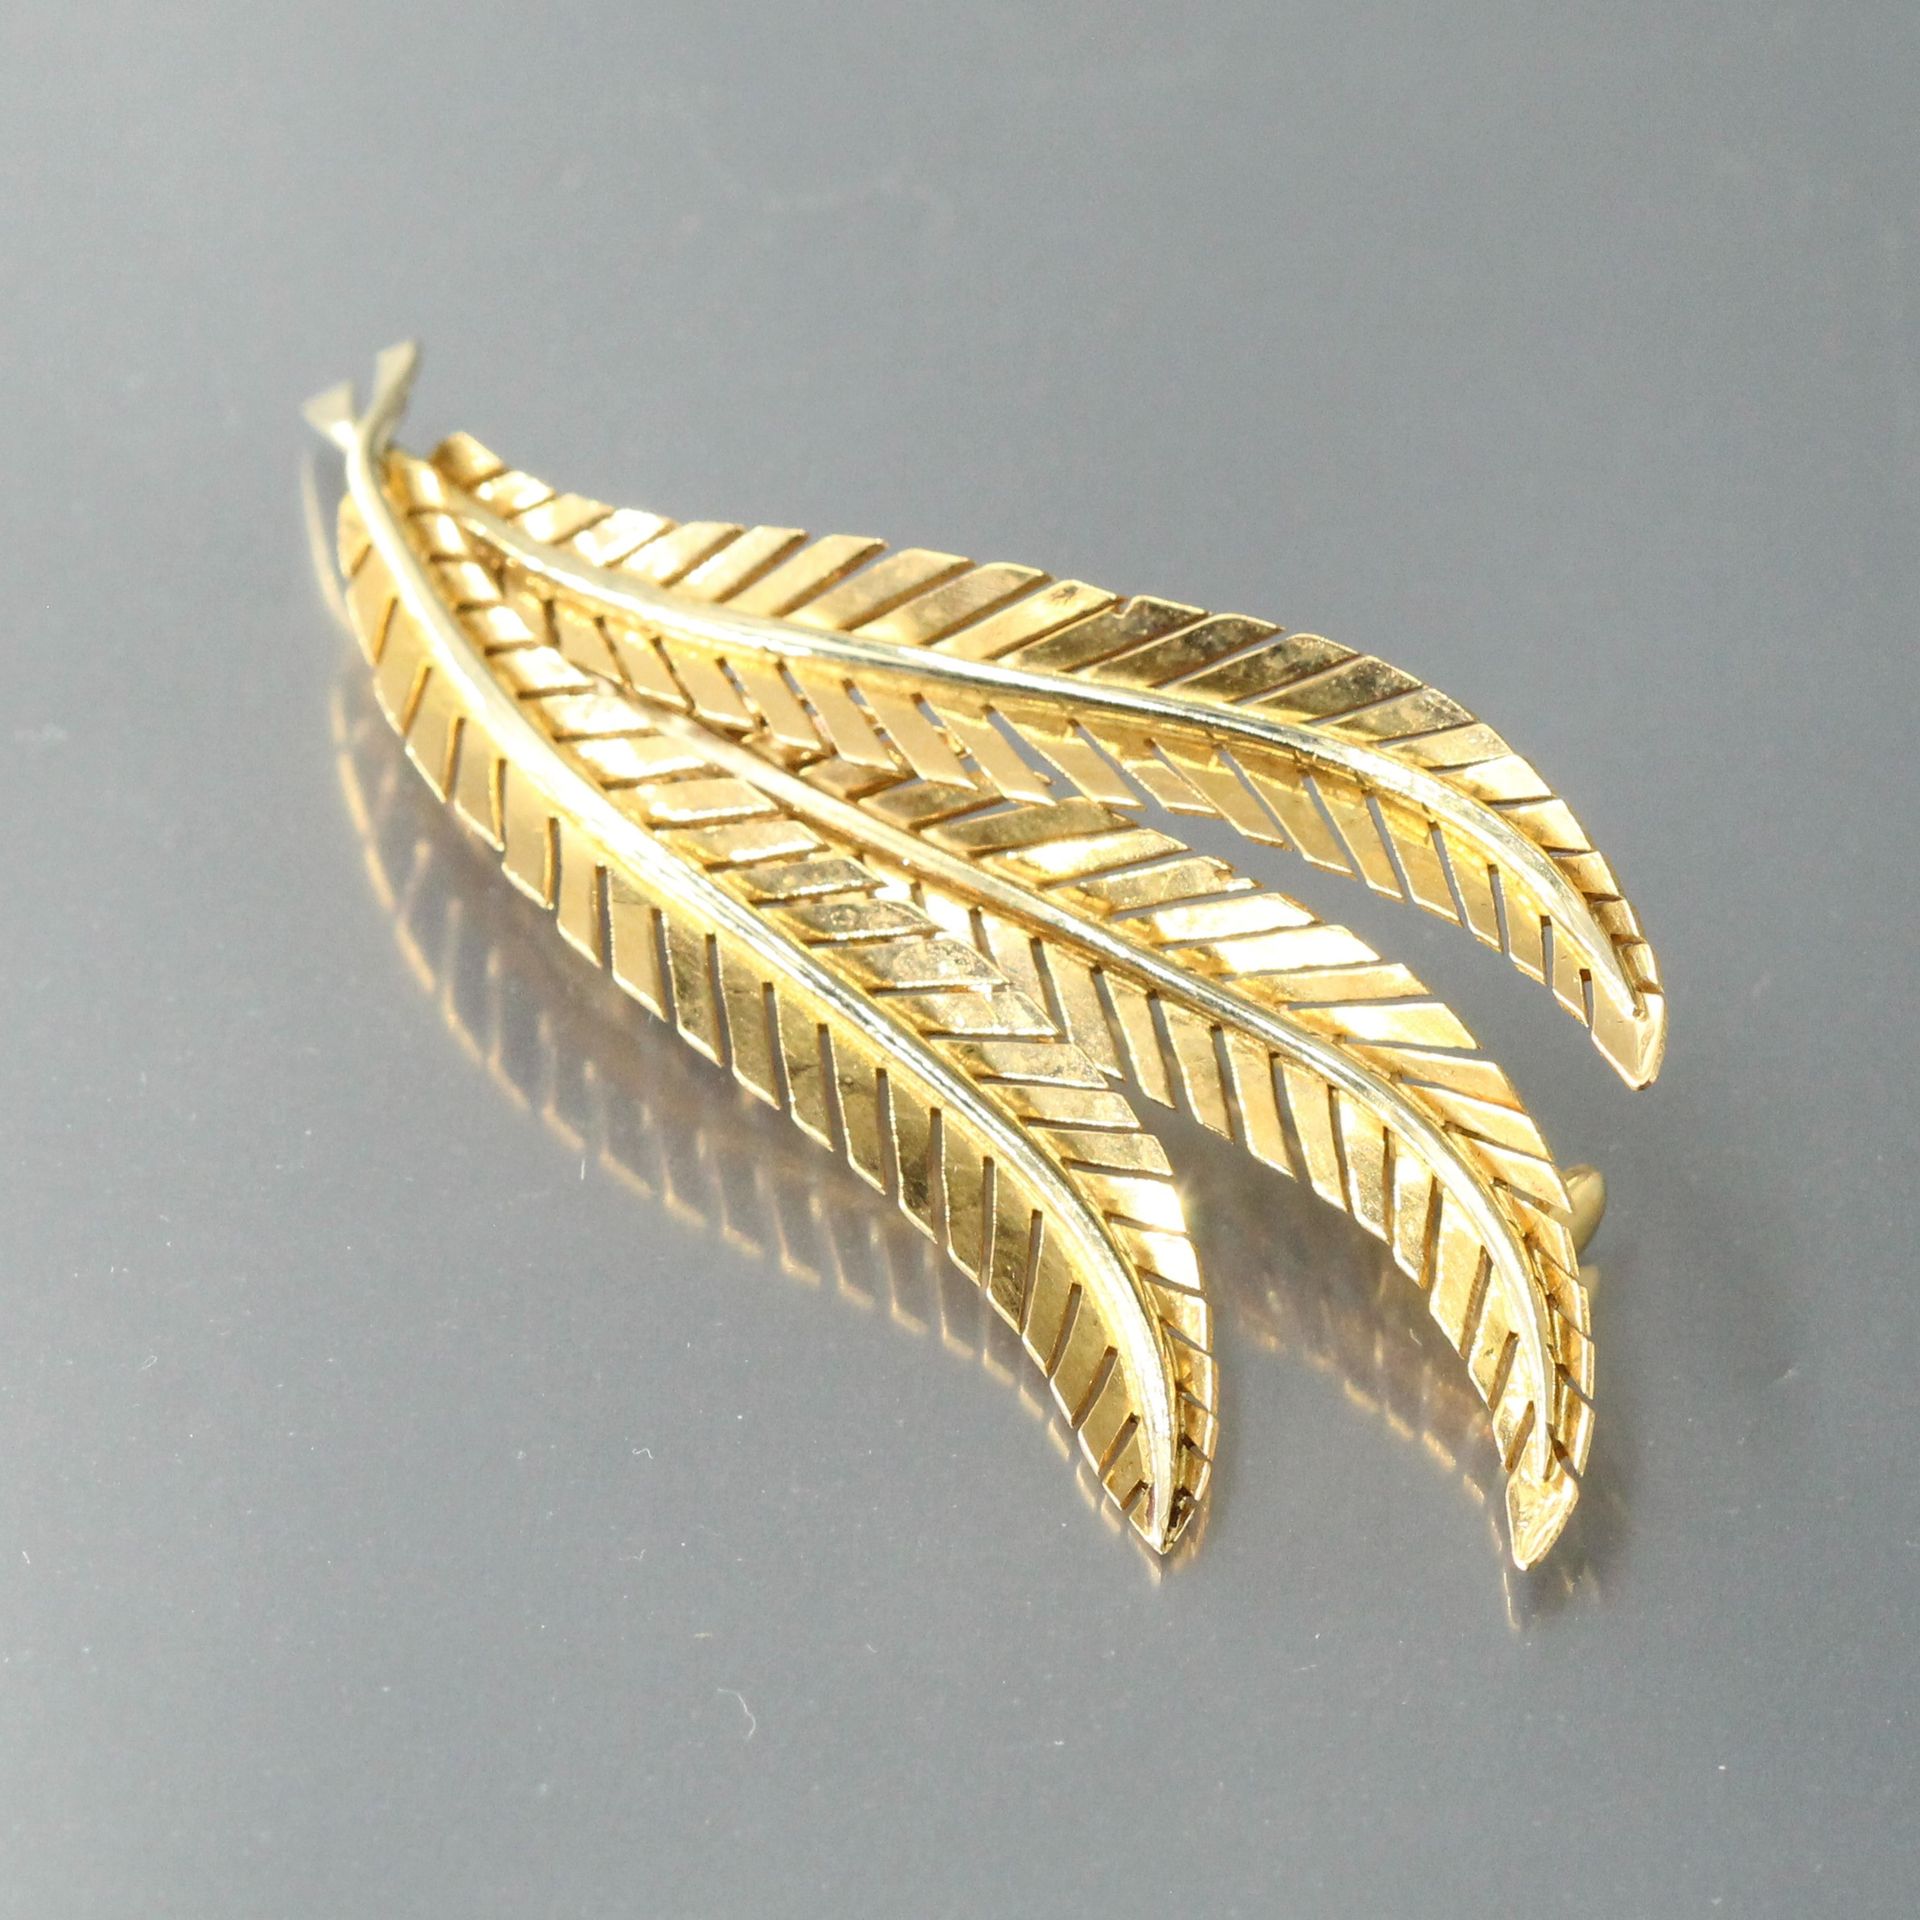 Null 18k (750) yellow gold brooch styling three leaves.

Gross weight: 6.68 g.